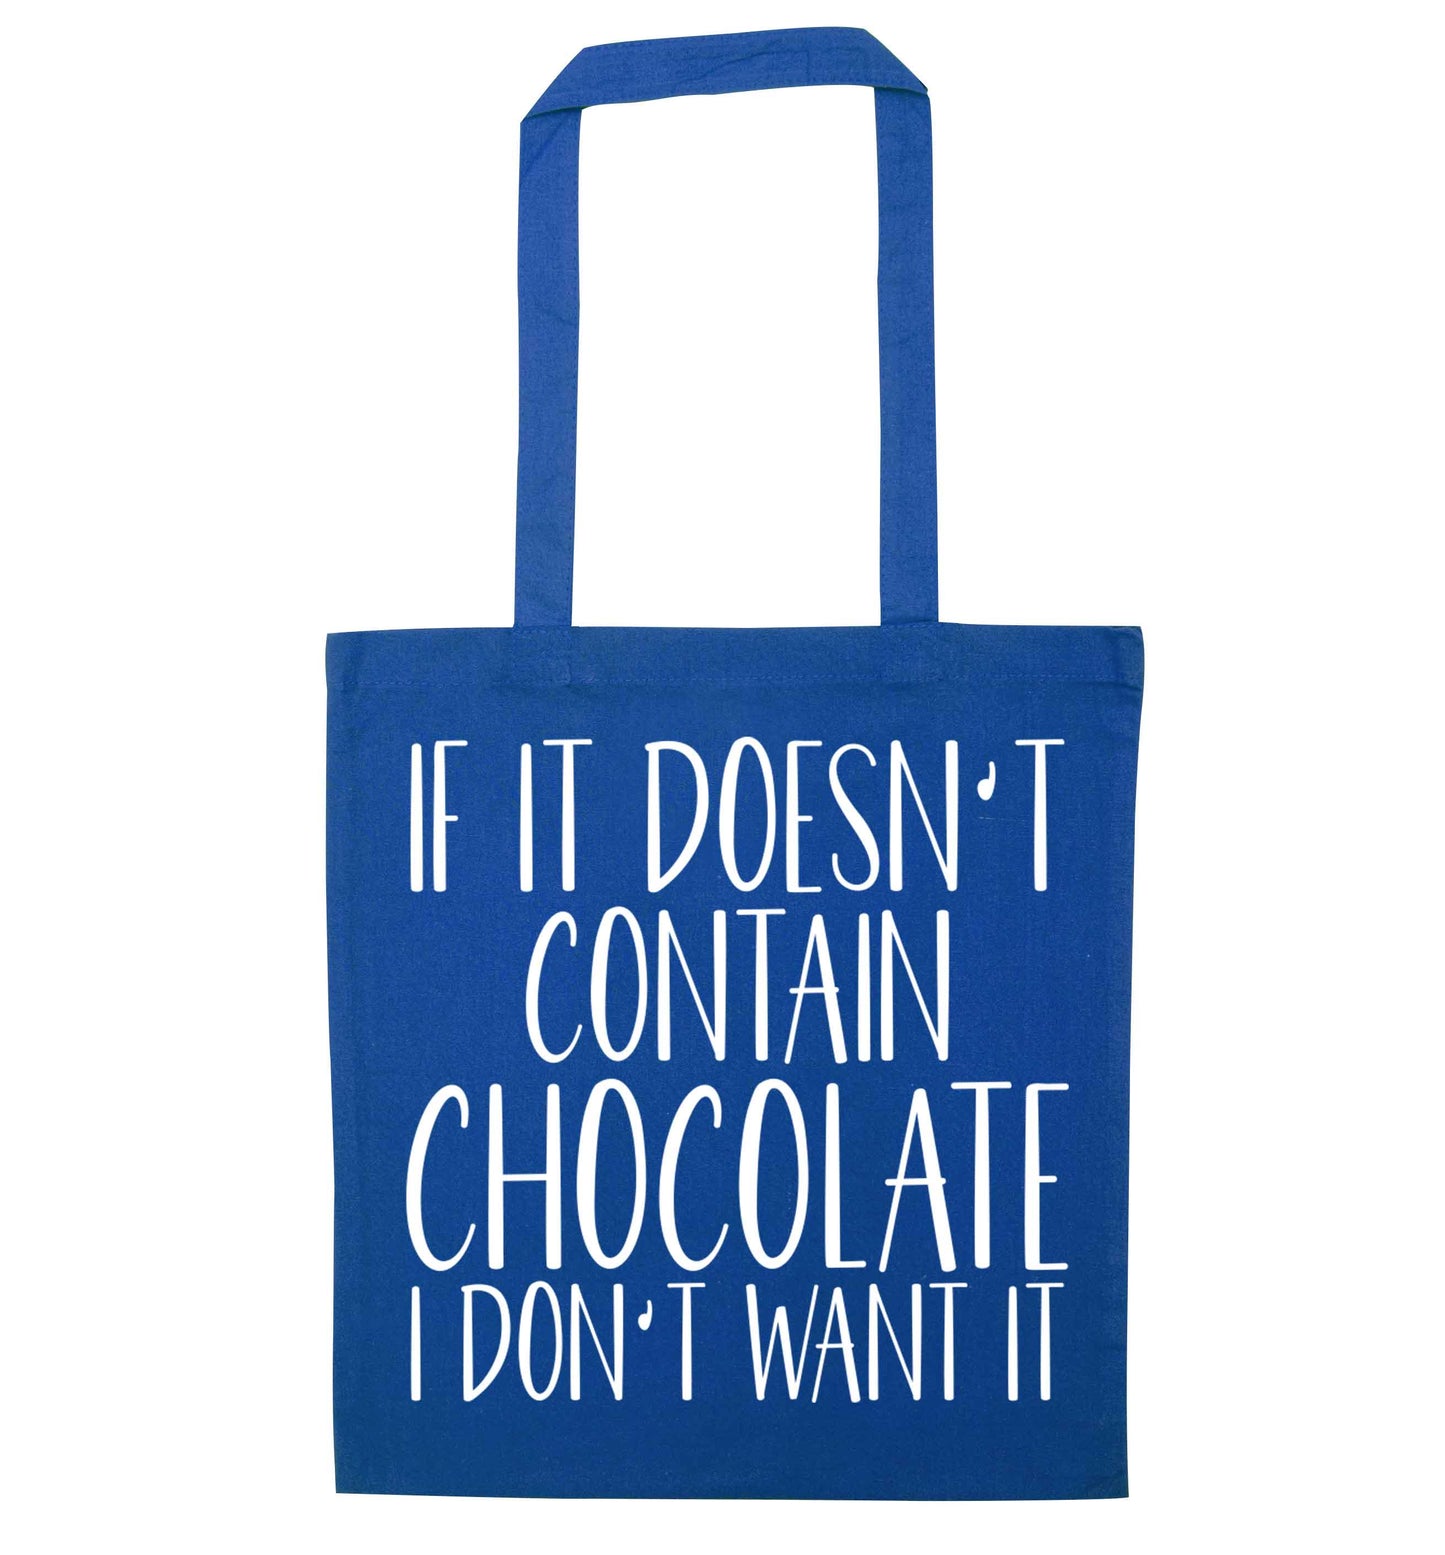 If it doesn't contain chocolate I don't want it blue tote bag